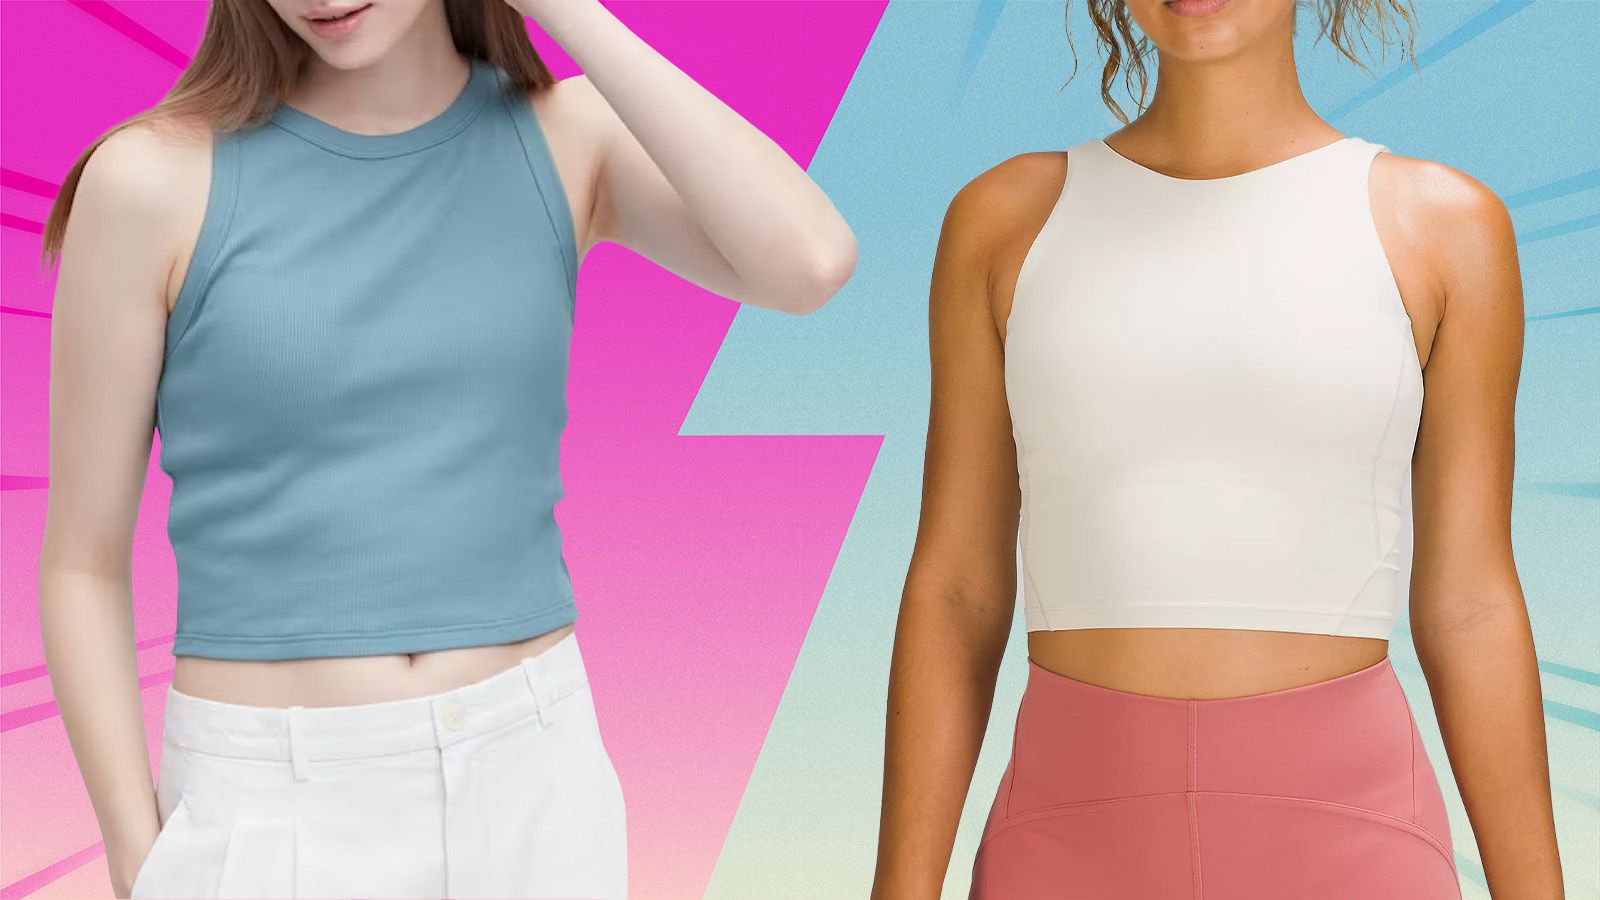 The Viral TikTok Uniqlo Bra Top - Is it worth the hype??